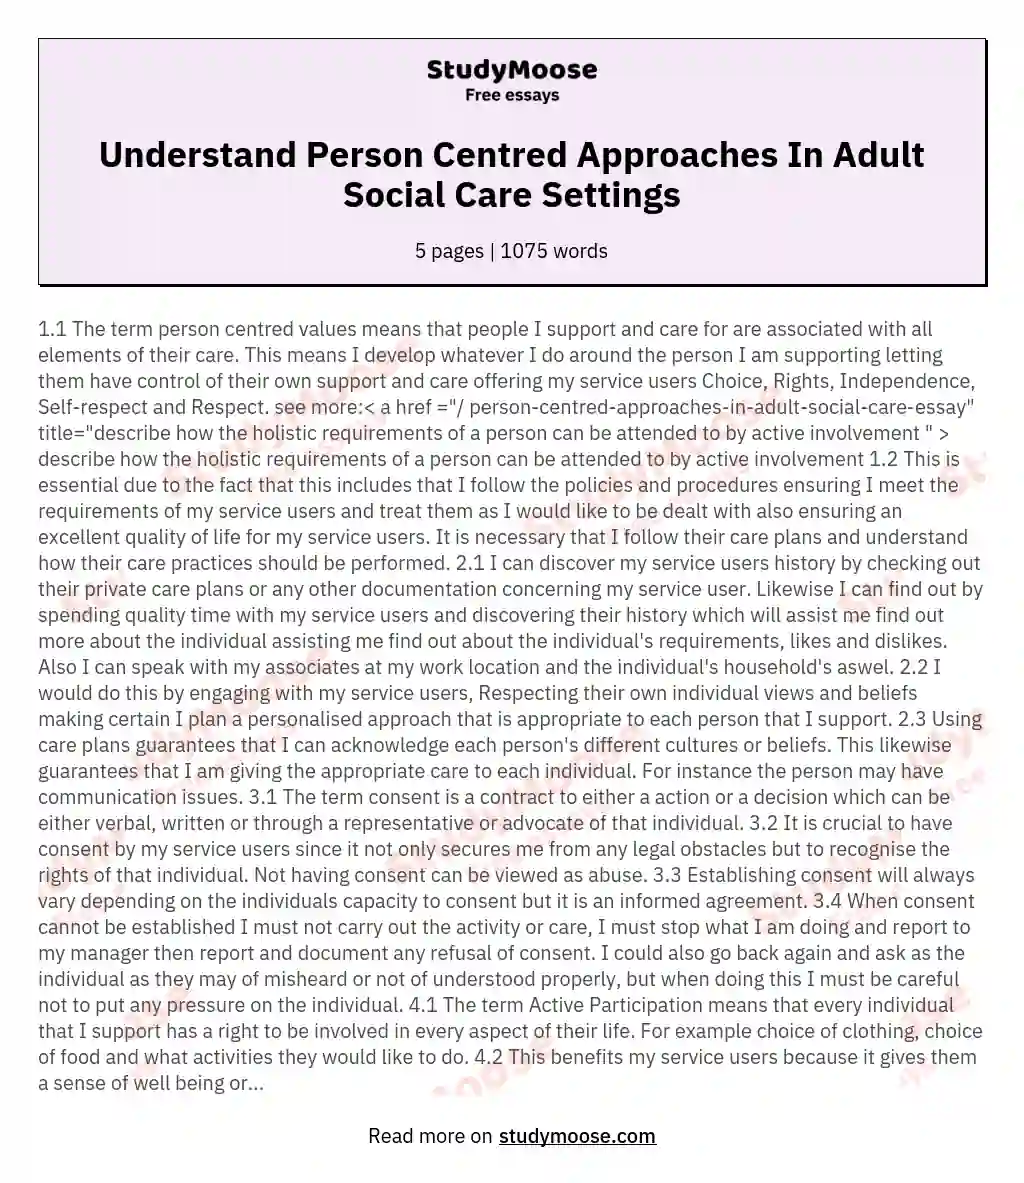 Understand Person Centred Approaches In Adult Social Care Settings